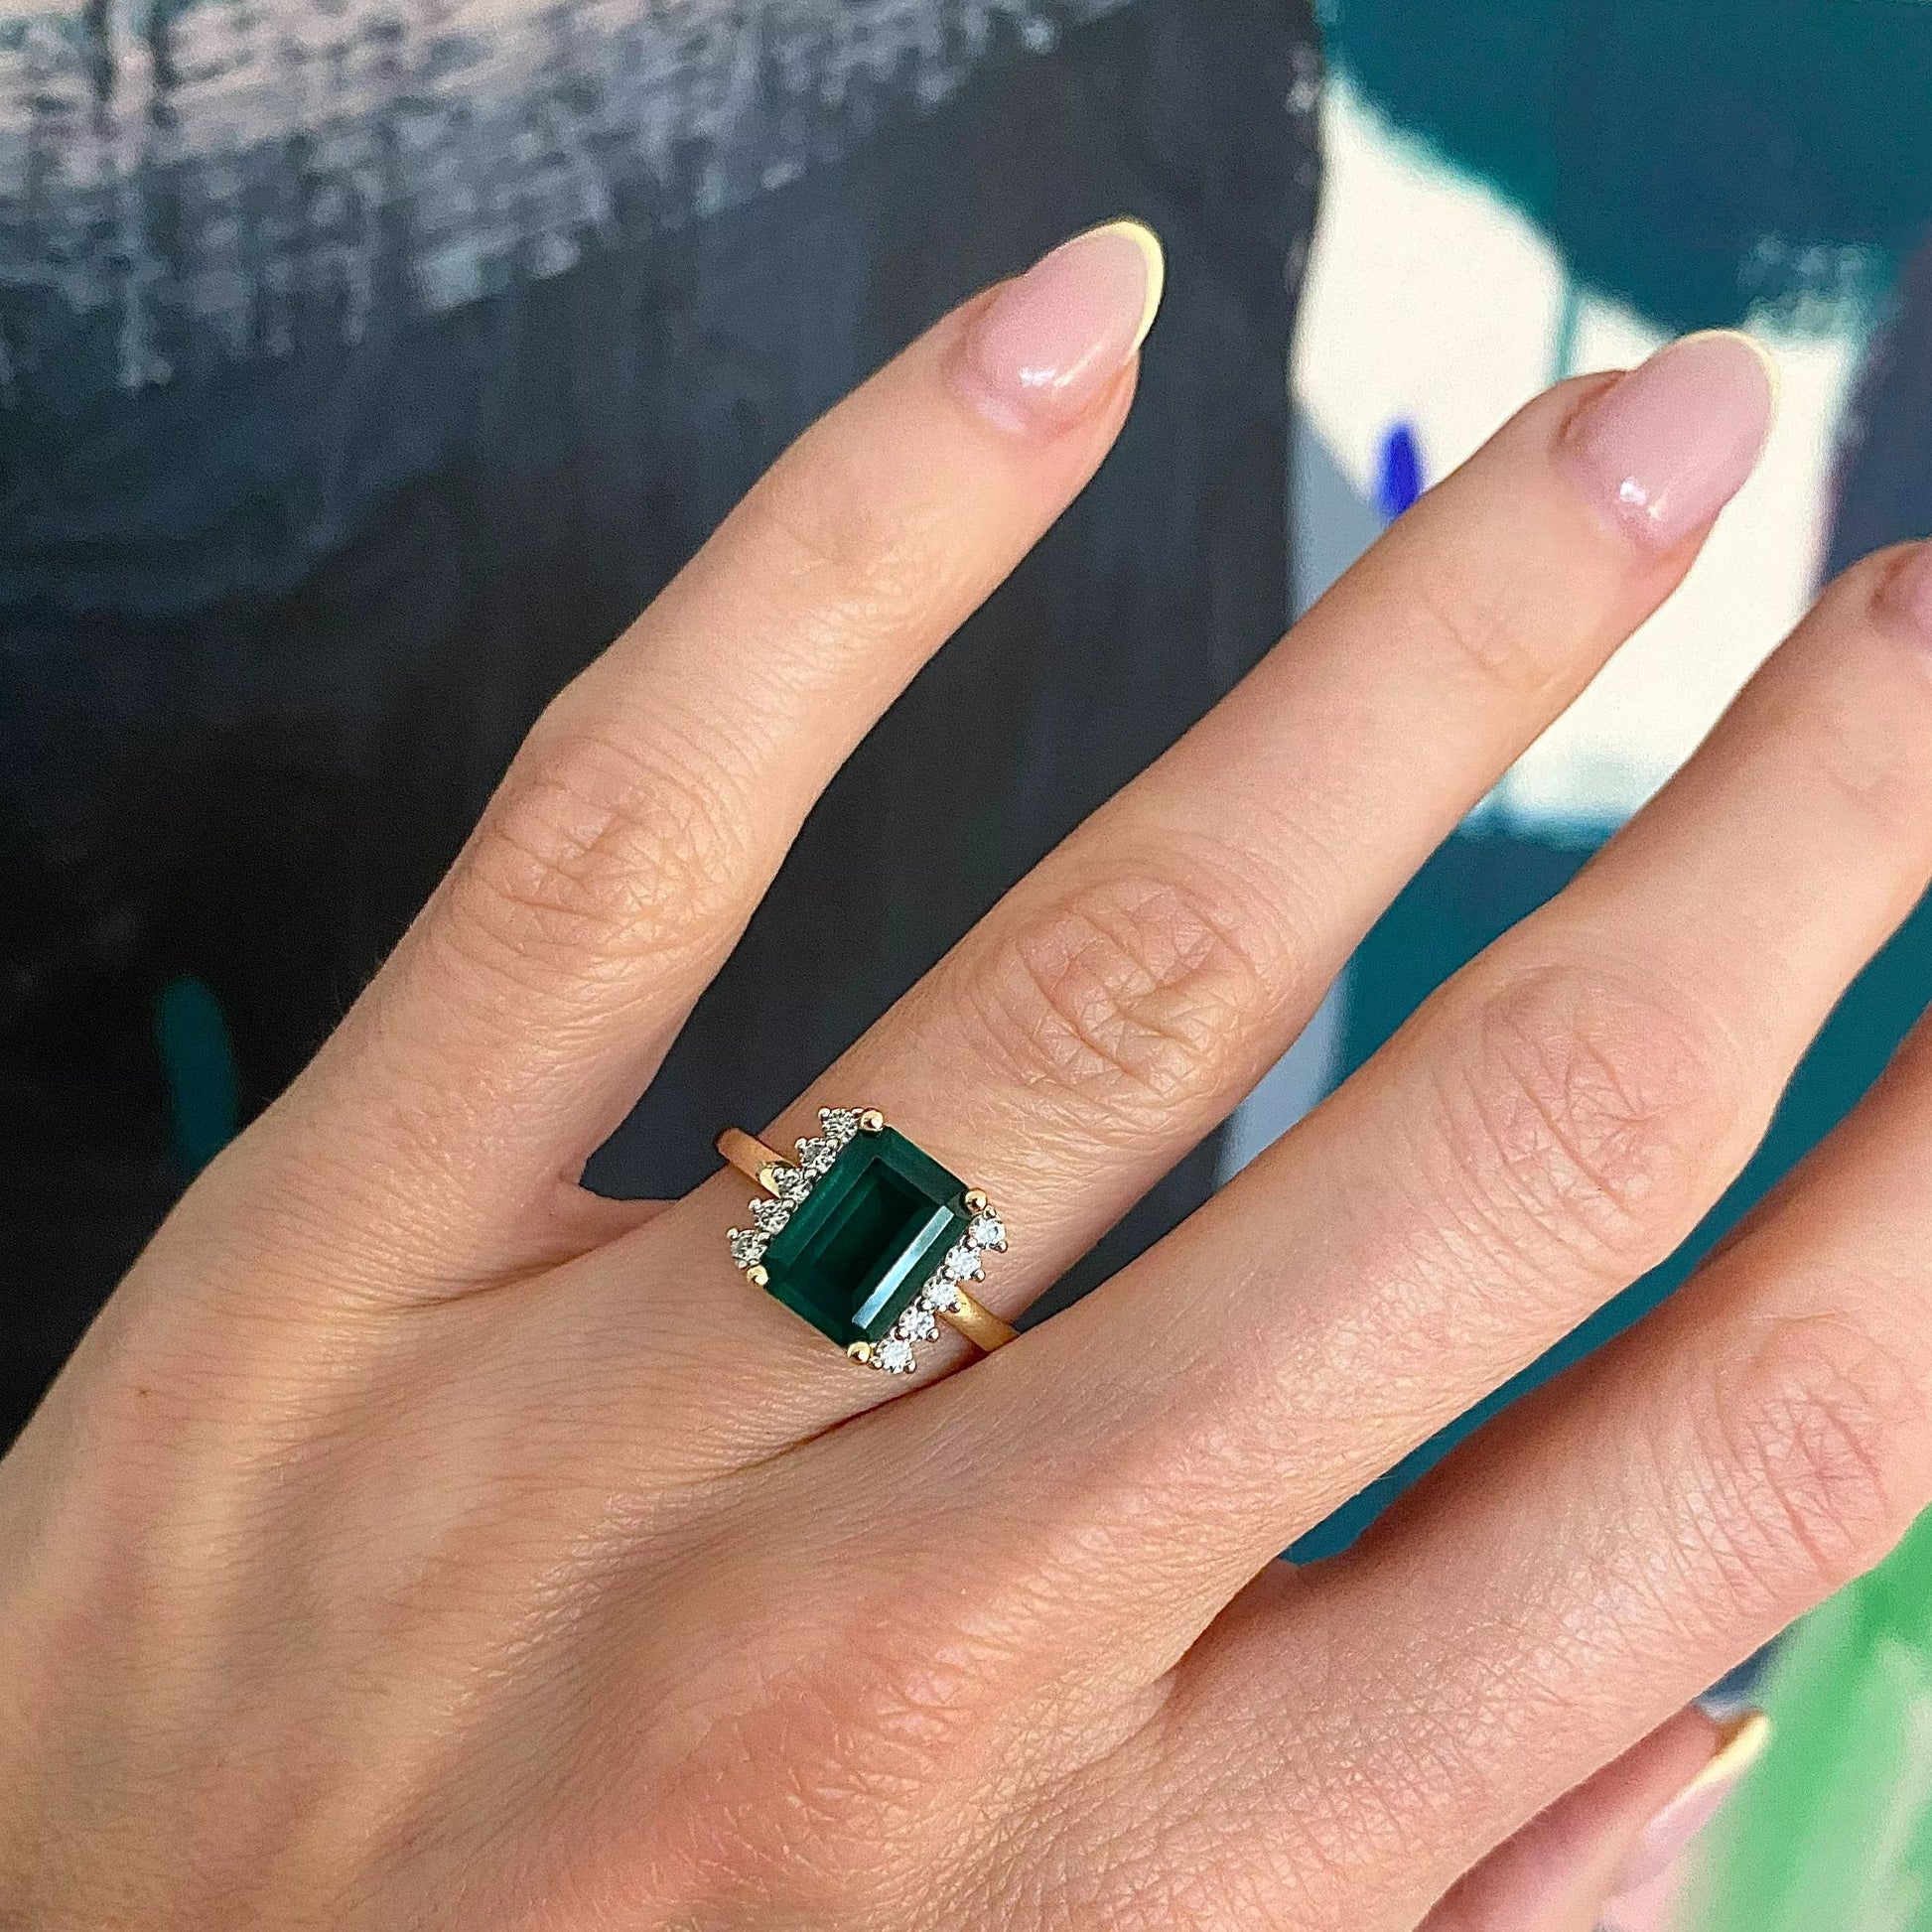 The Emerald Rectangular Ring. Recycle Gold